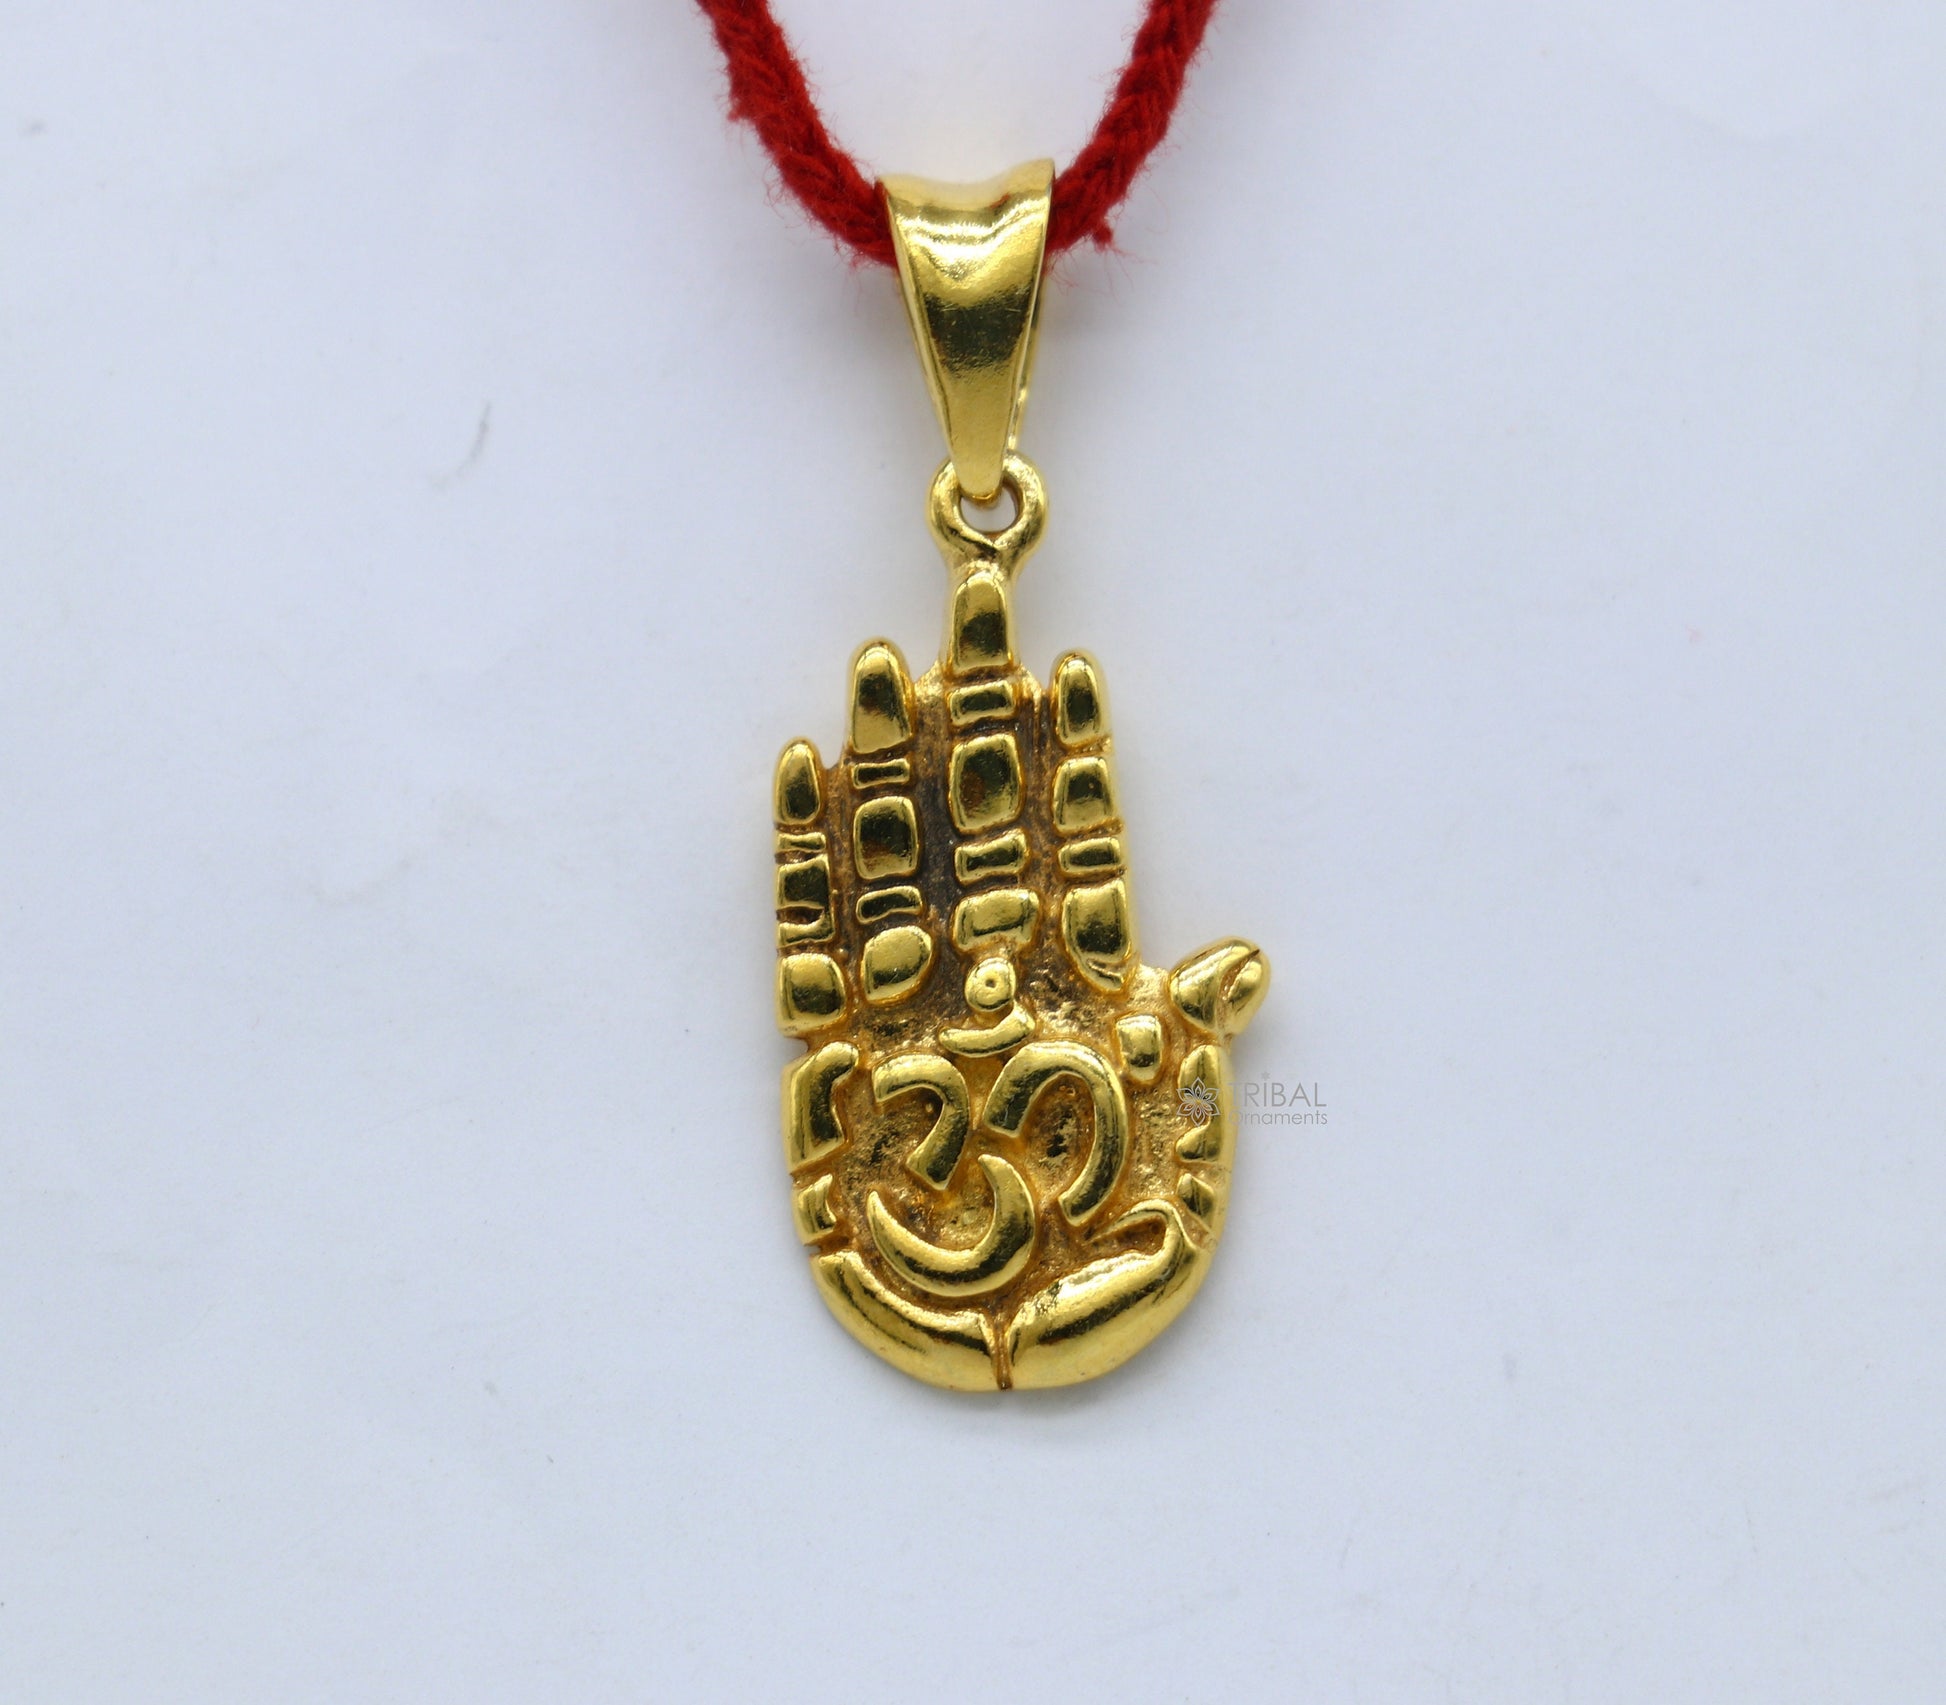 925 sterling silver handmade divine hand palm with 'AUM' excellent unique design gold polished pendant, blessing palm pendant  nsp611 - TRIBAL ORNAMENTS